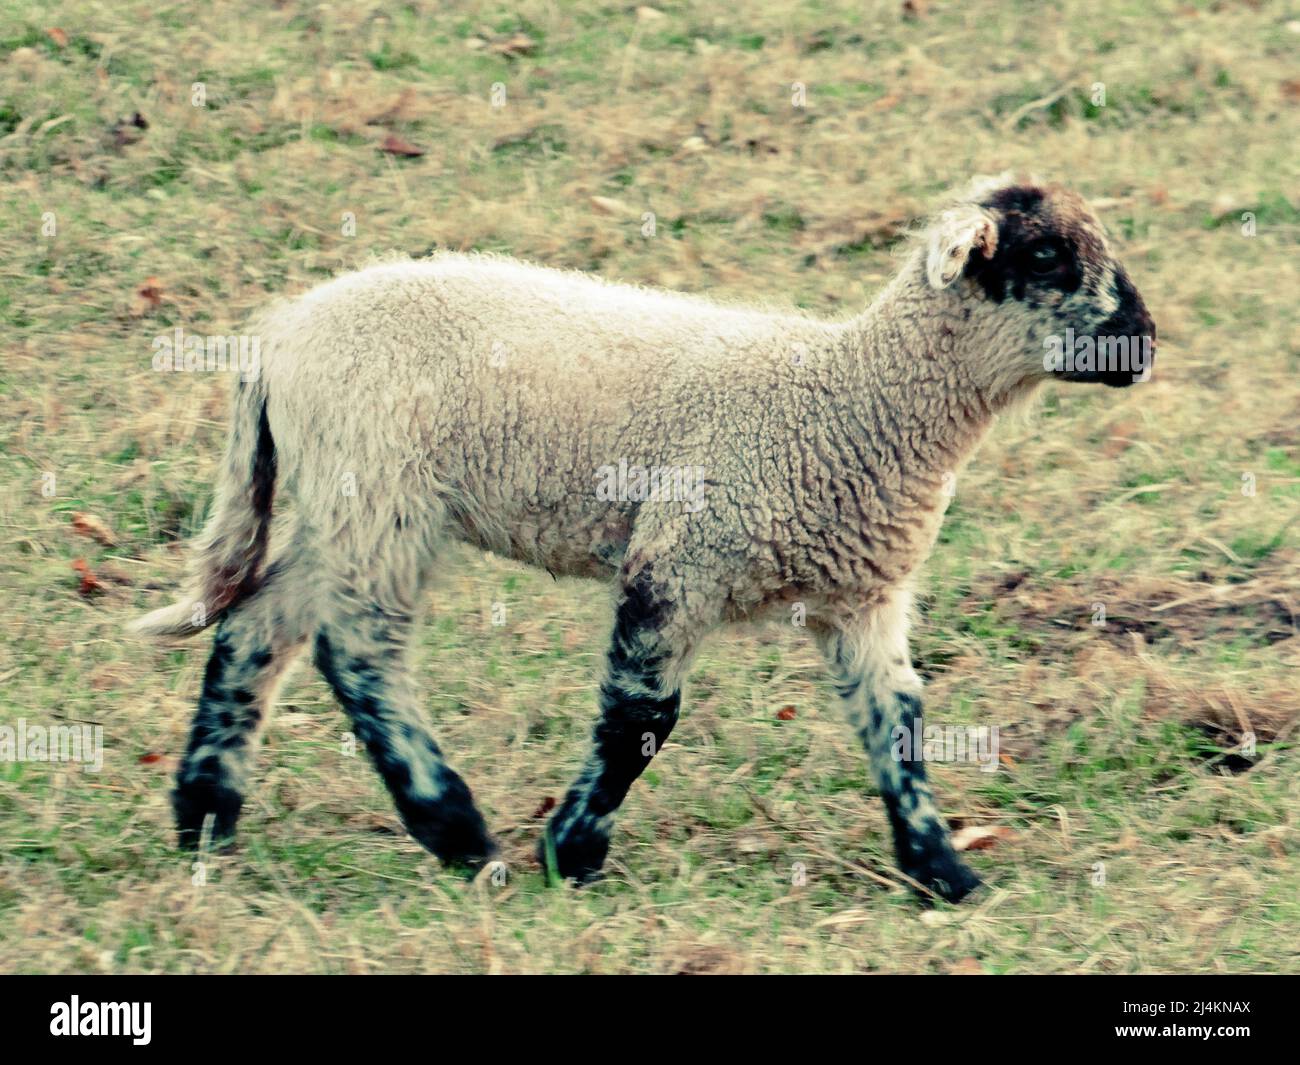 A springtime lamb walking. Black and white young sheep on a meadow. Stock Photo